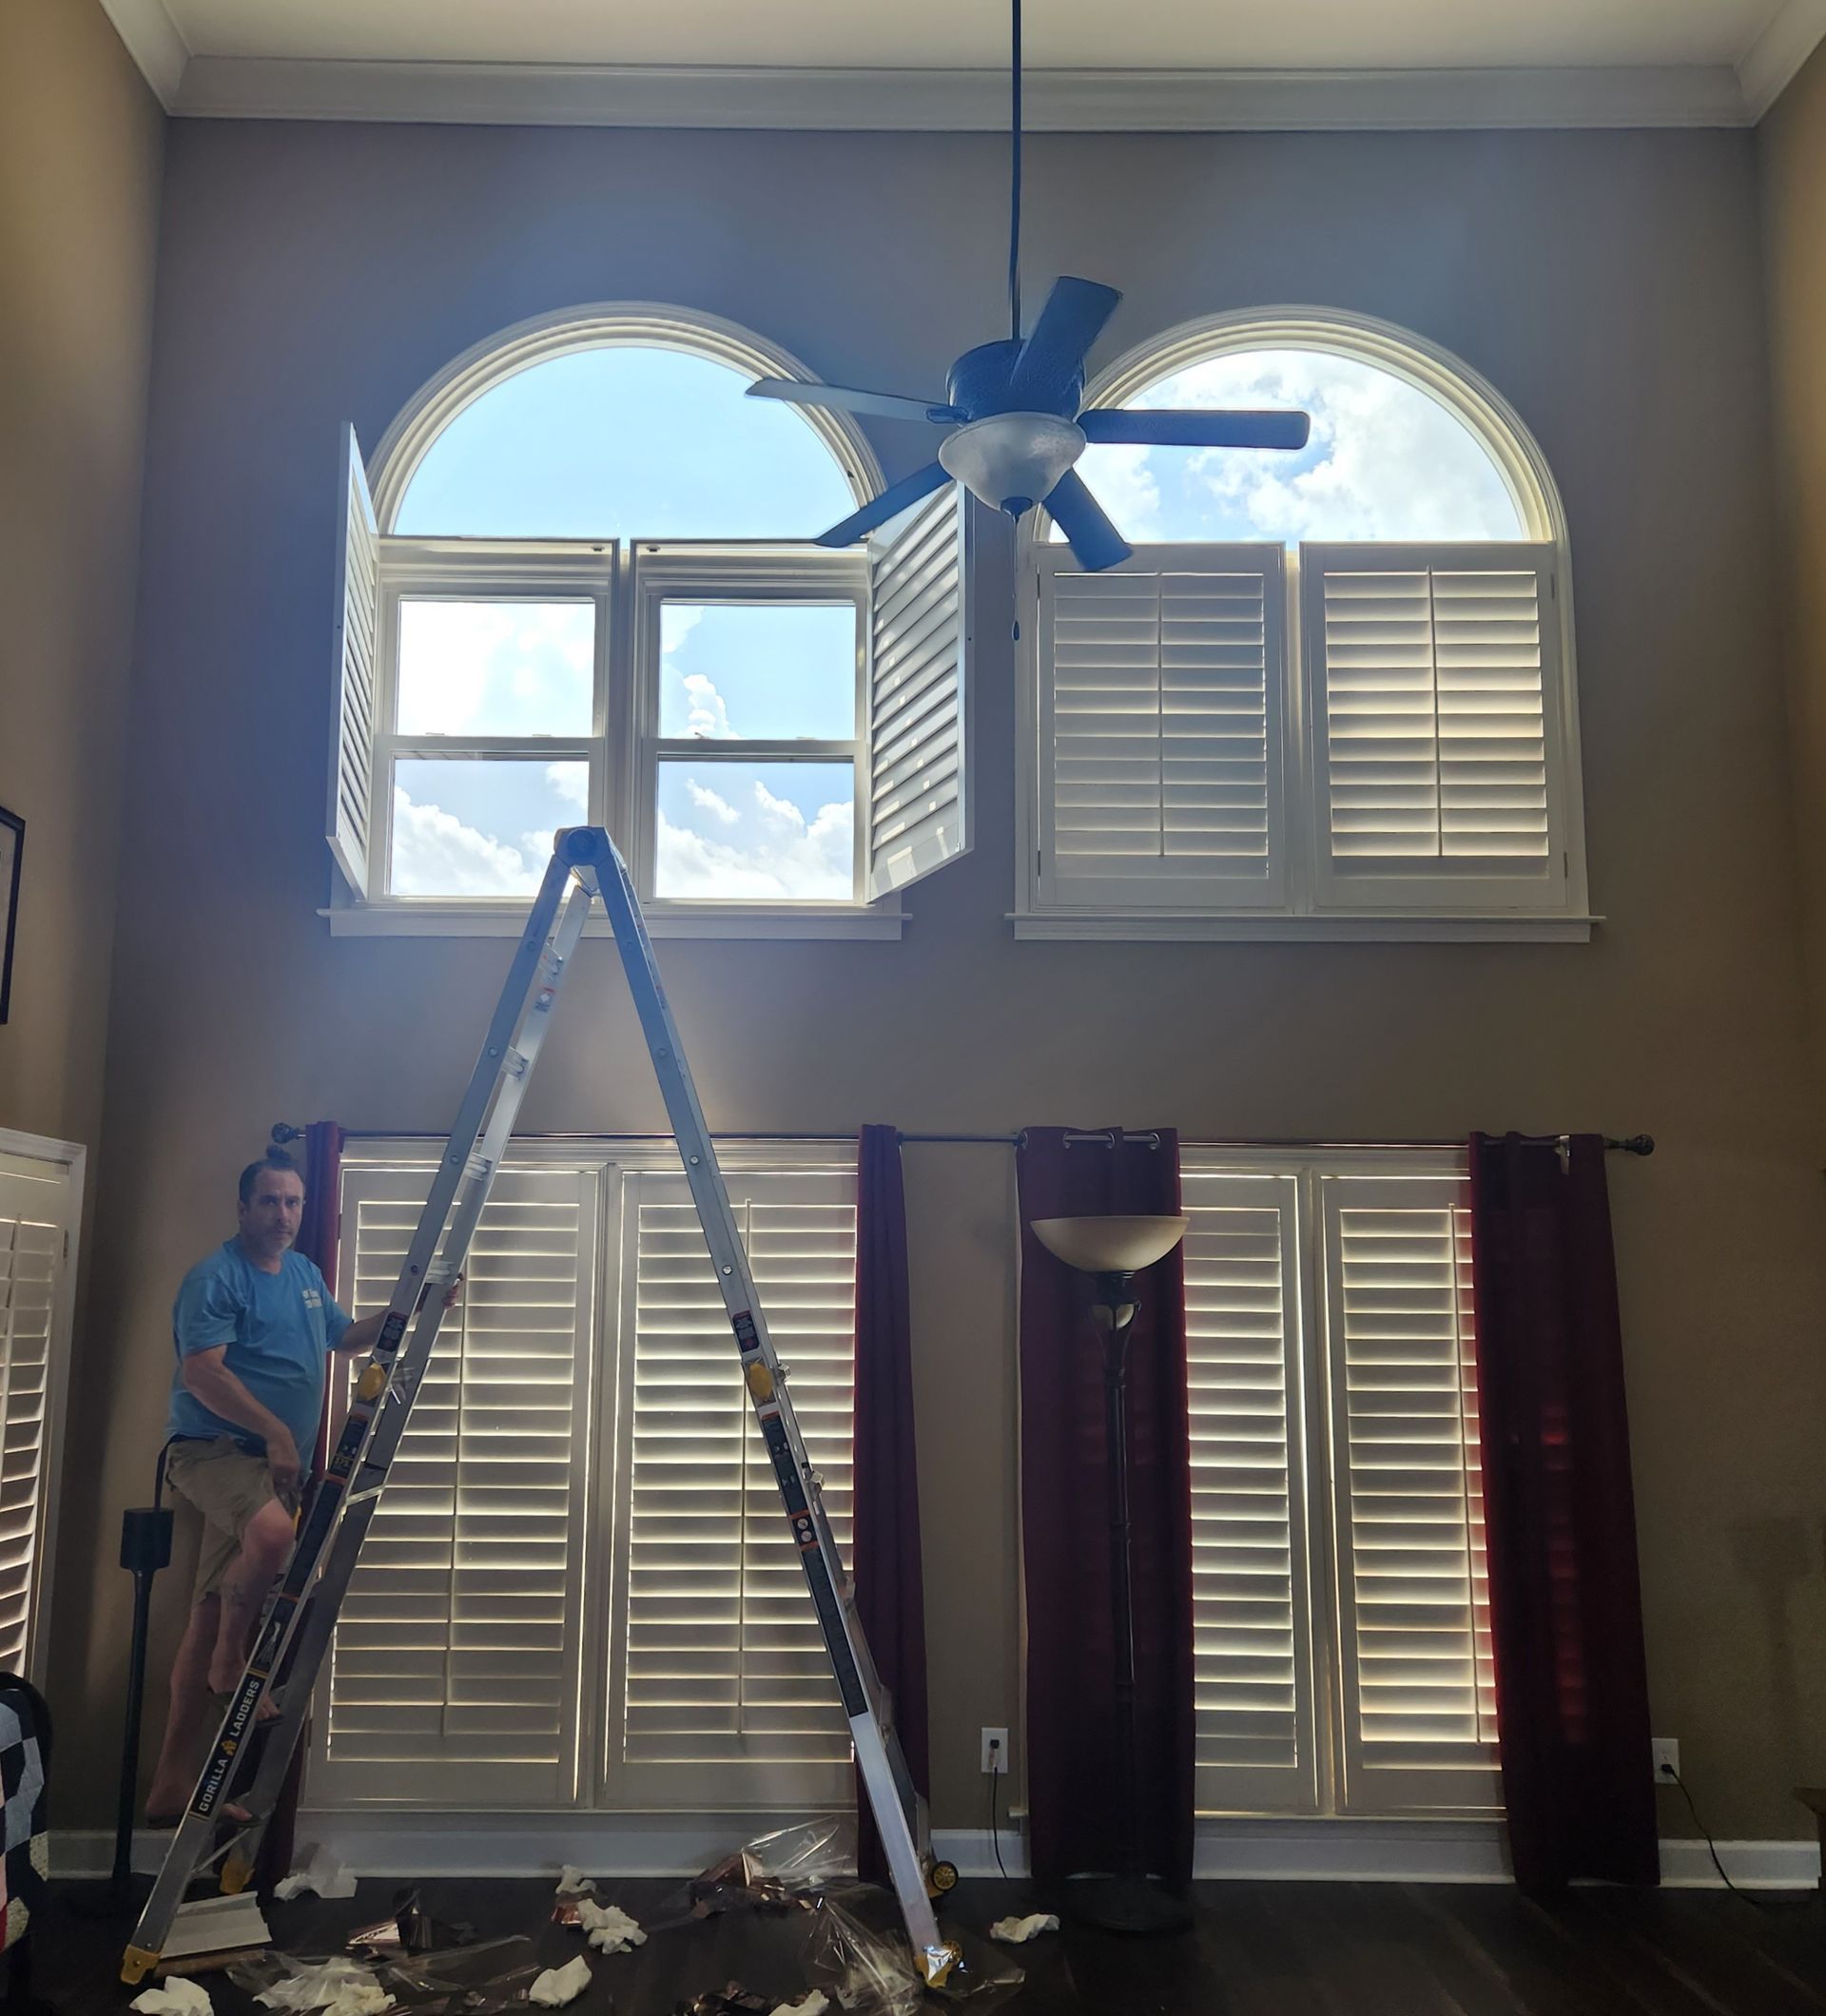 home window tinting - SPF Residential Tint blocked heat gain causing temperature gaps and constant cooling expense. Sun Glare was also cut by 75%. Montgomery, AL